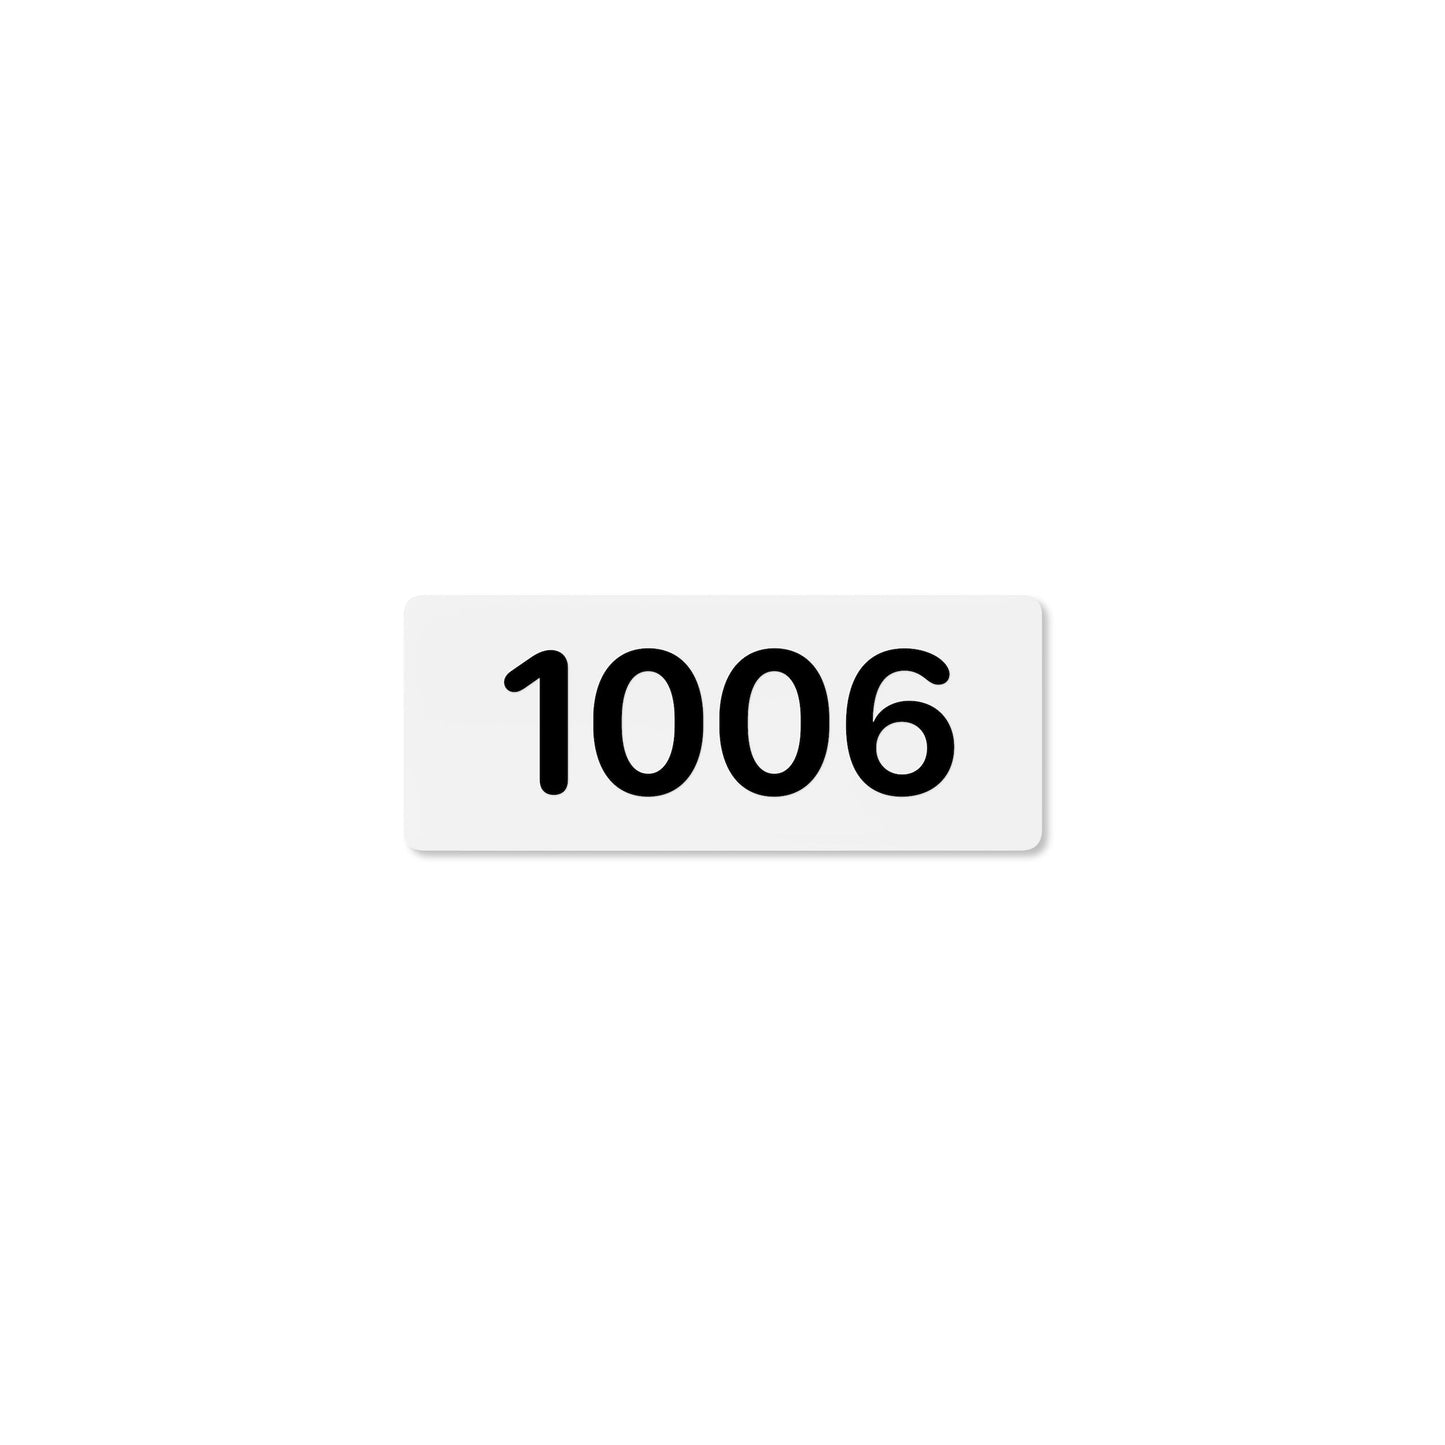 Numeral 1006